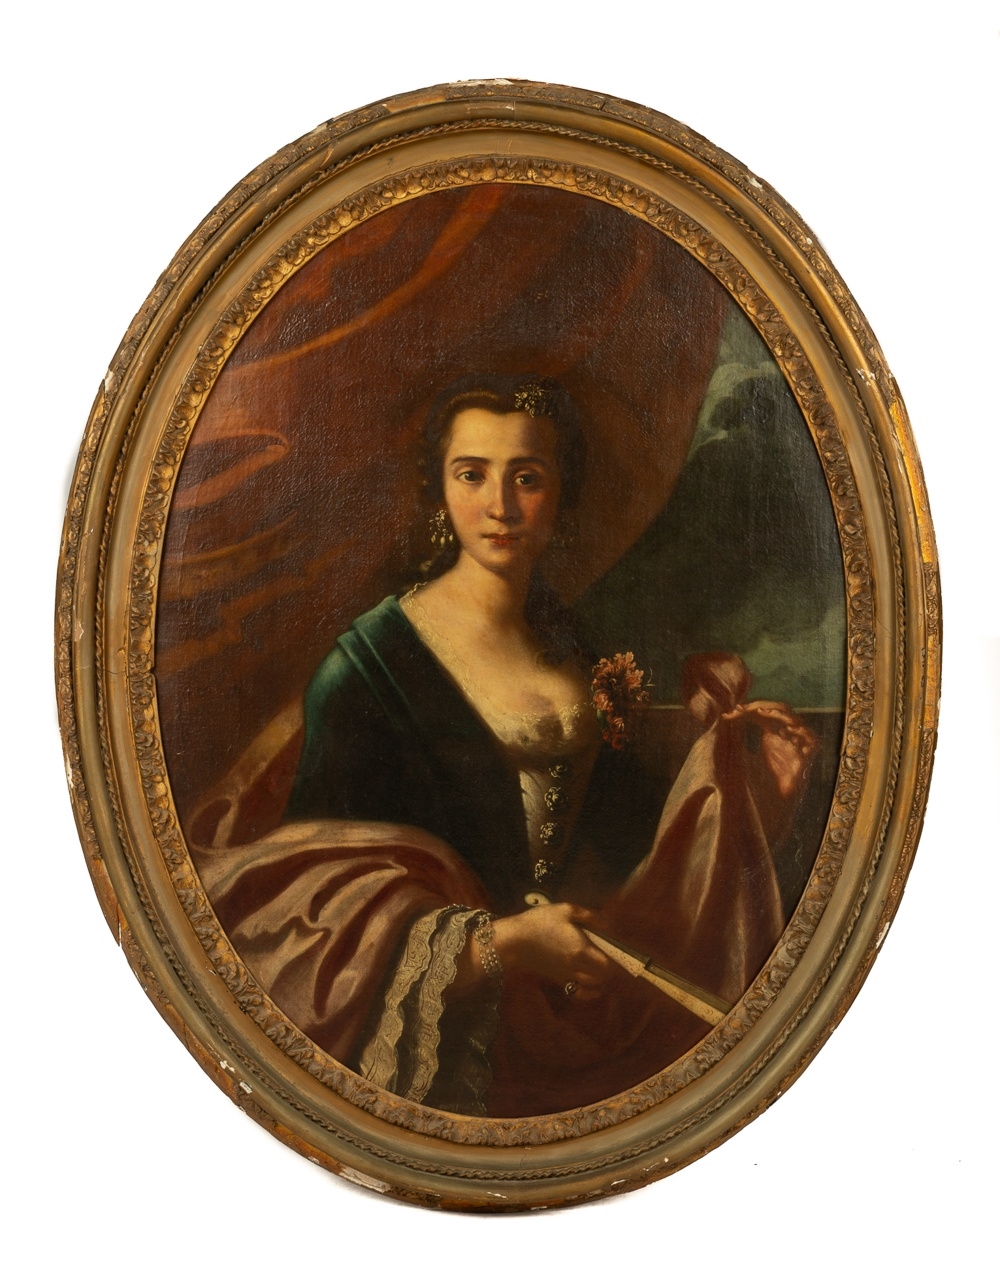 Portrait of a Young Woman by Giuseppe Bonito